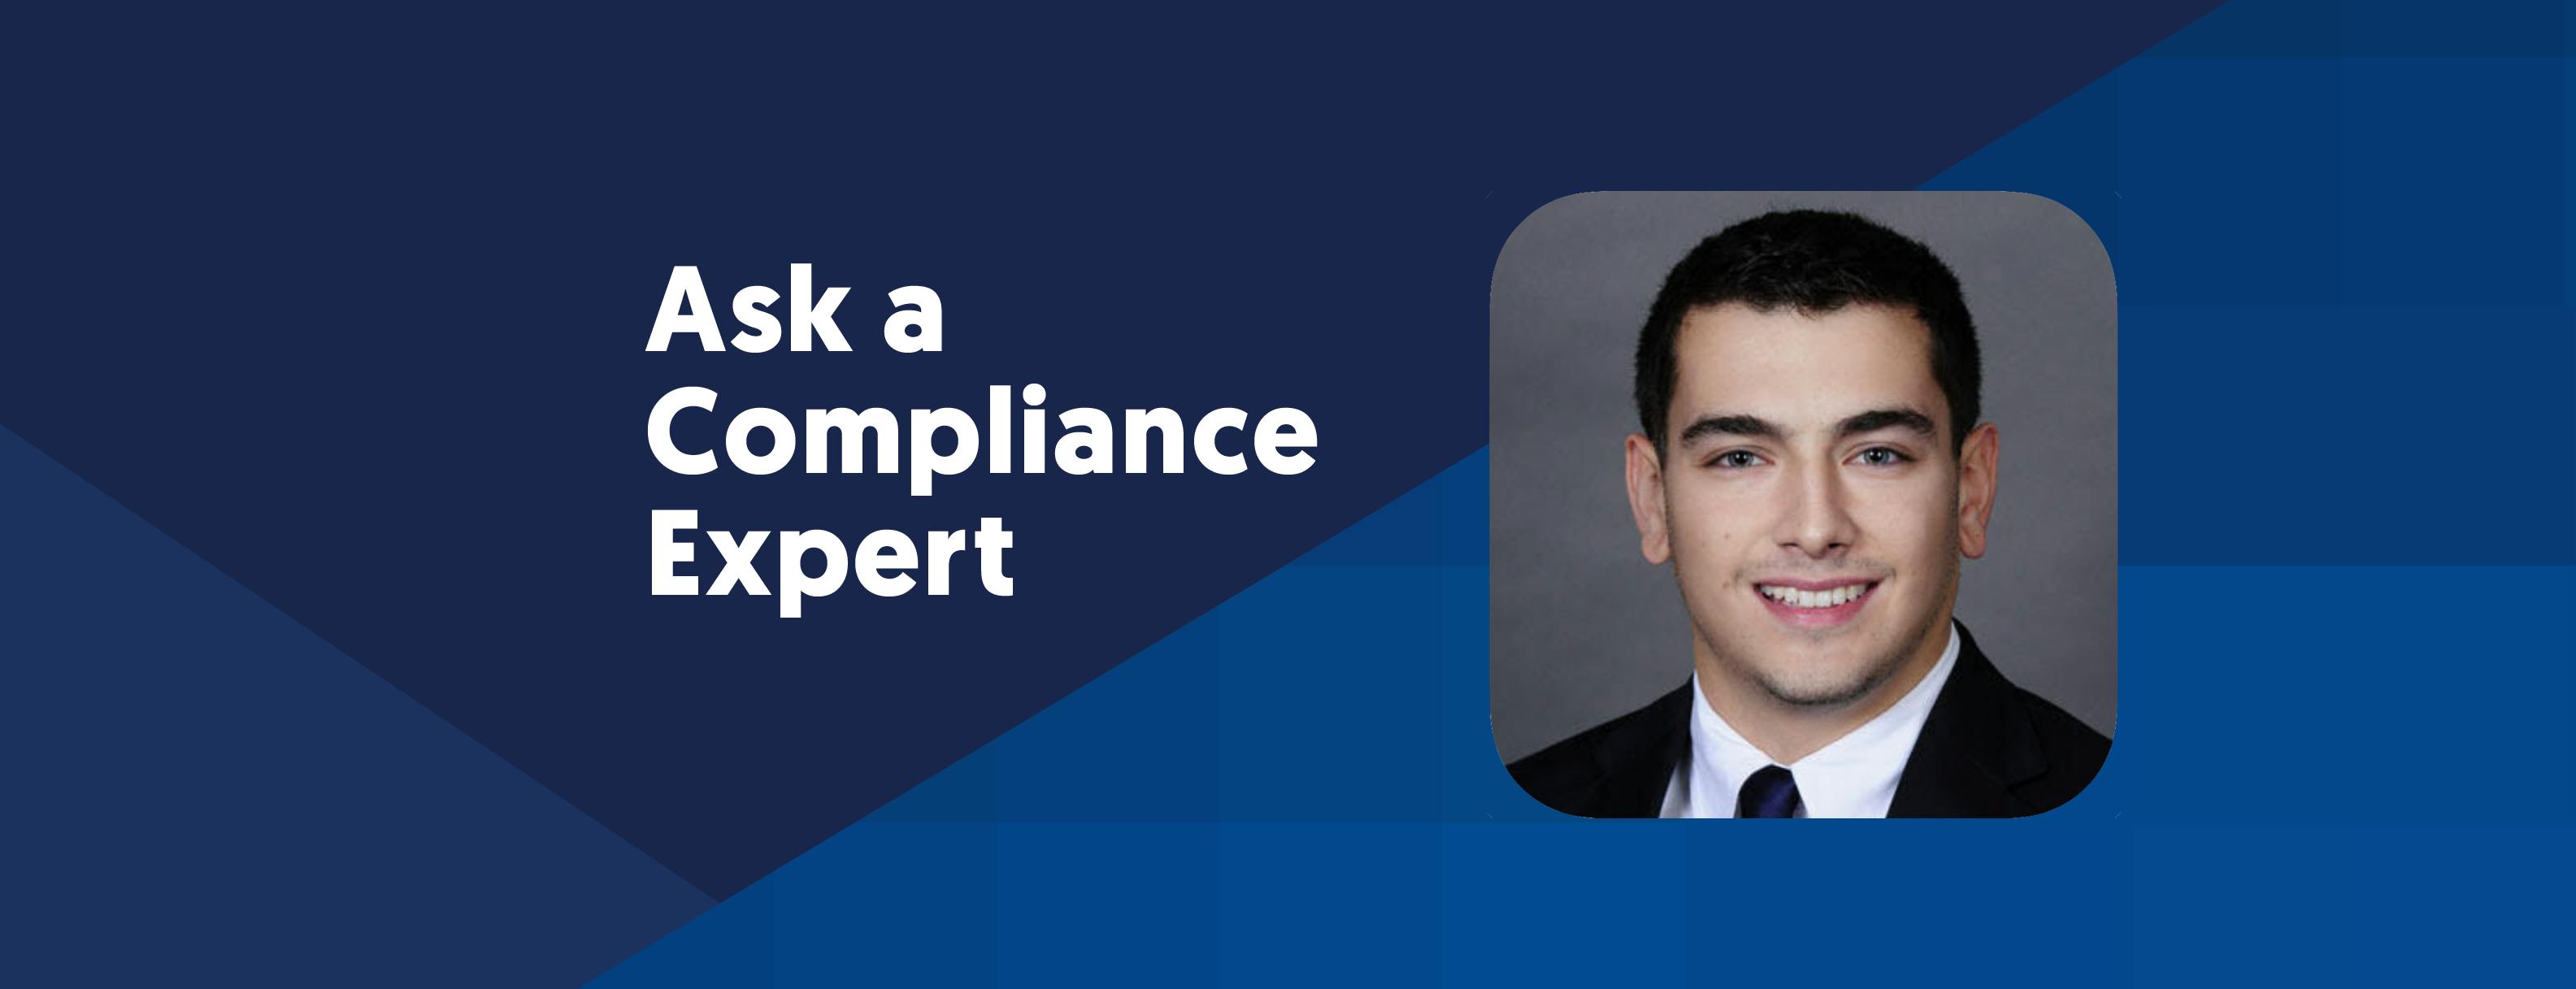 Ask the Compliance Expert: 10 Questions with Rob Gutierrez, CISA, CSSK